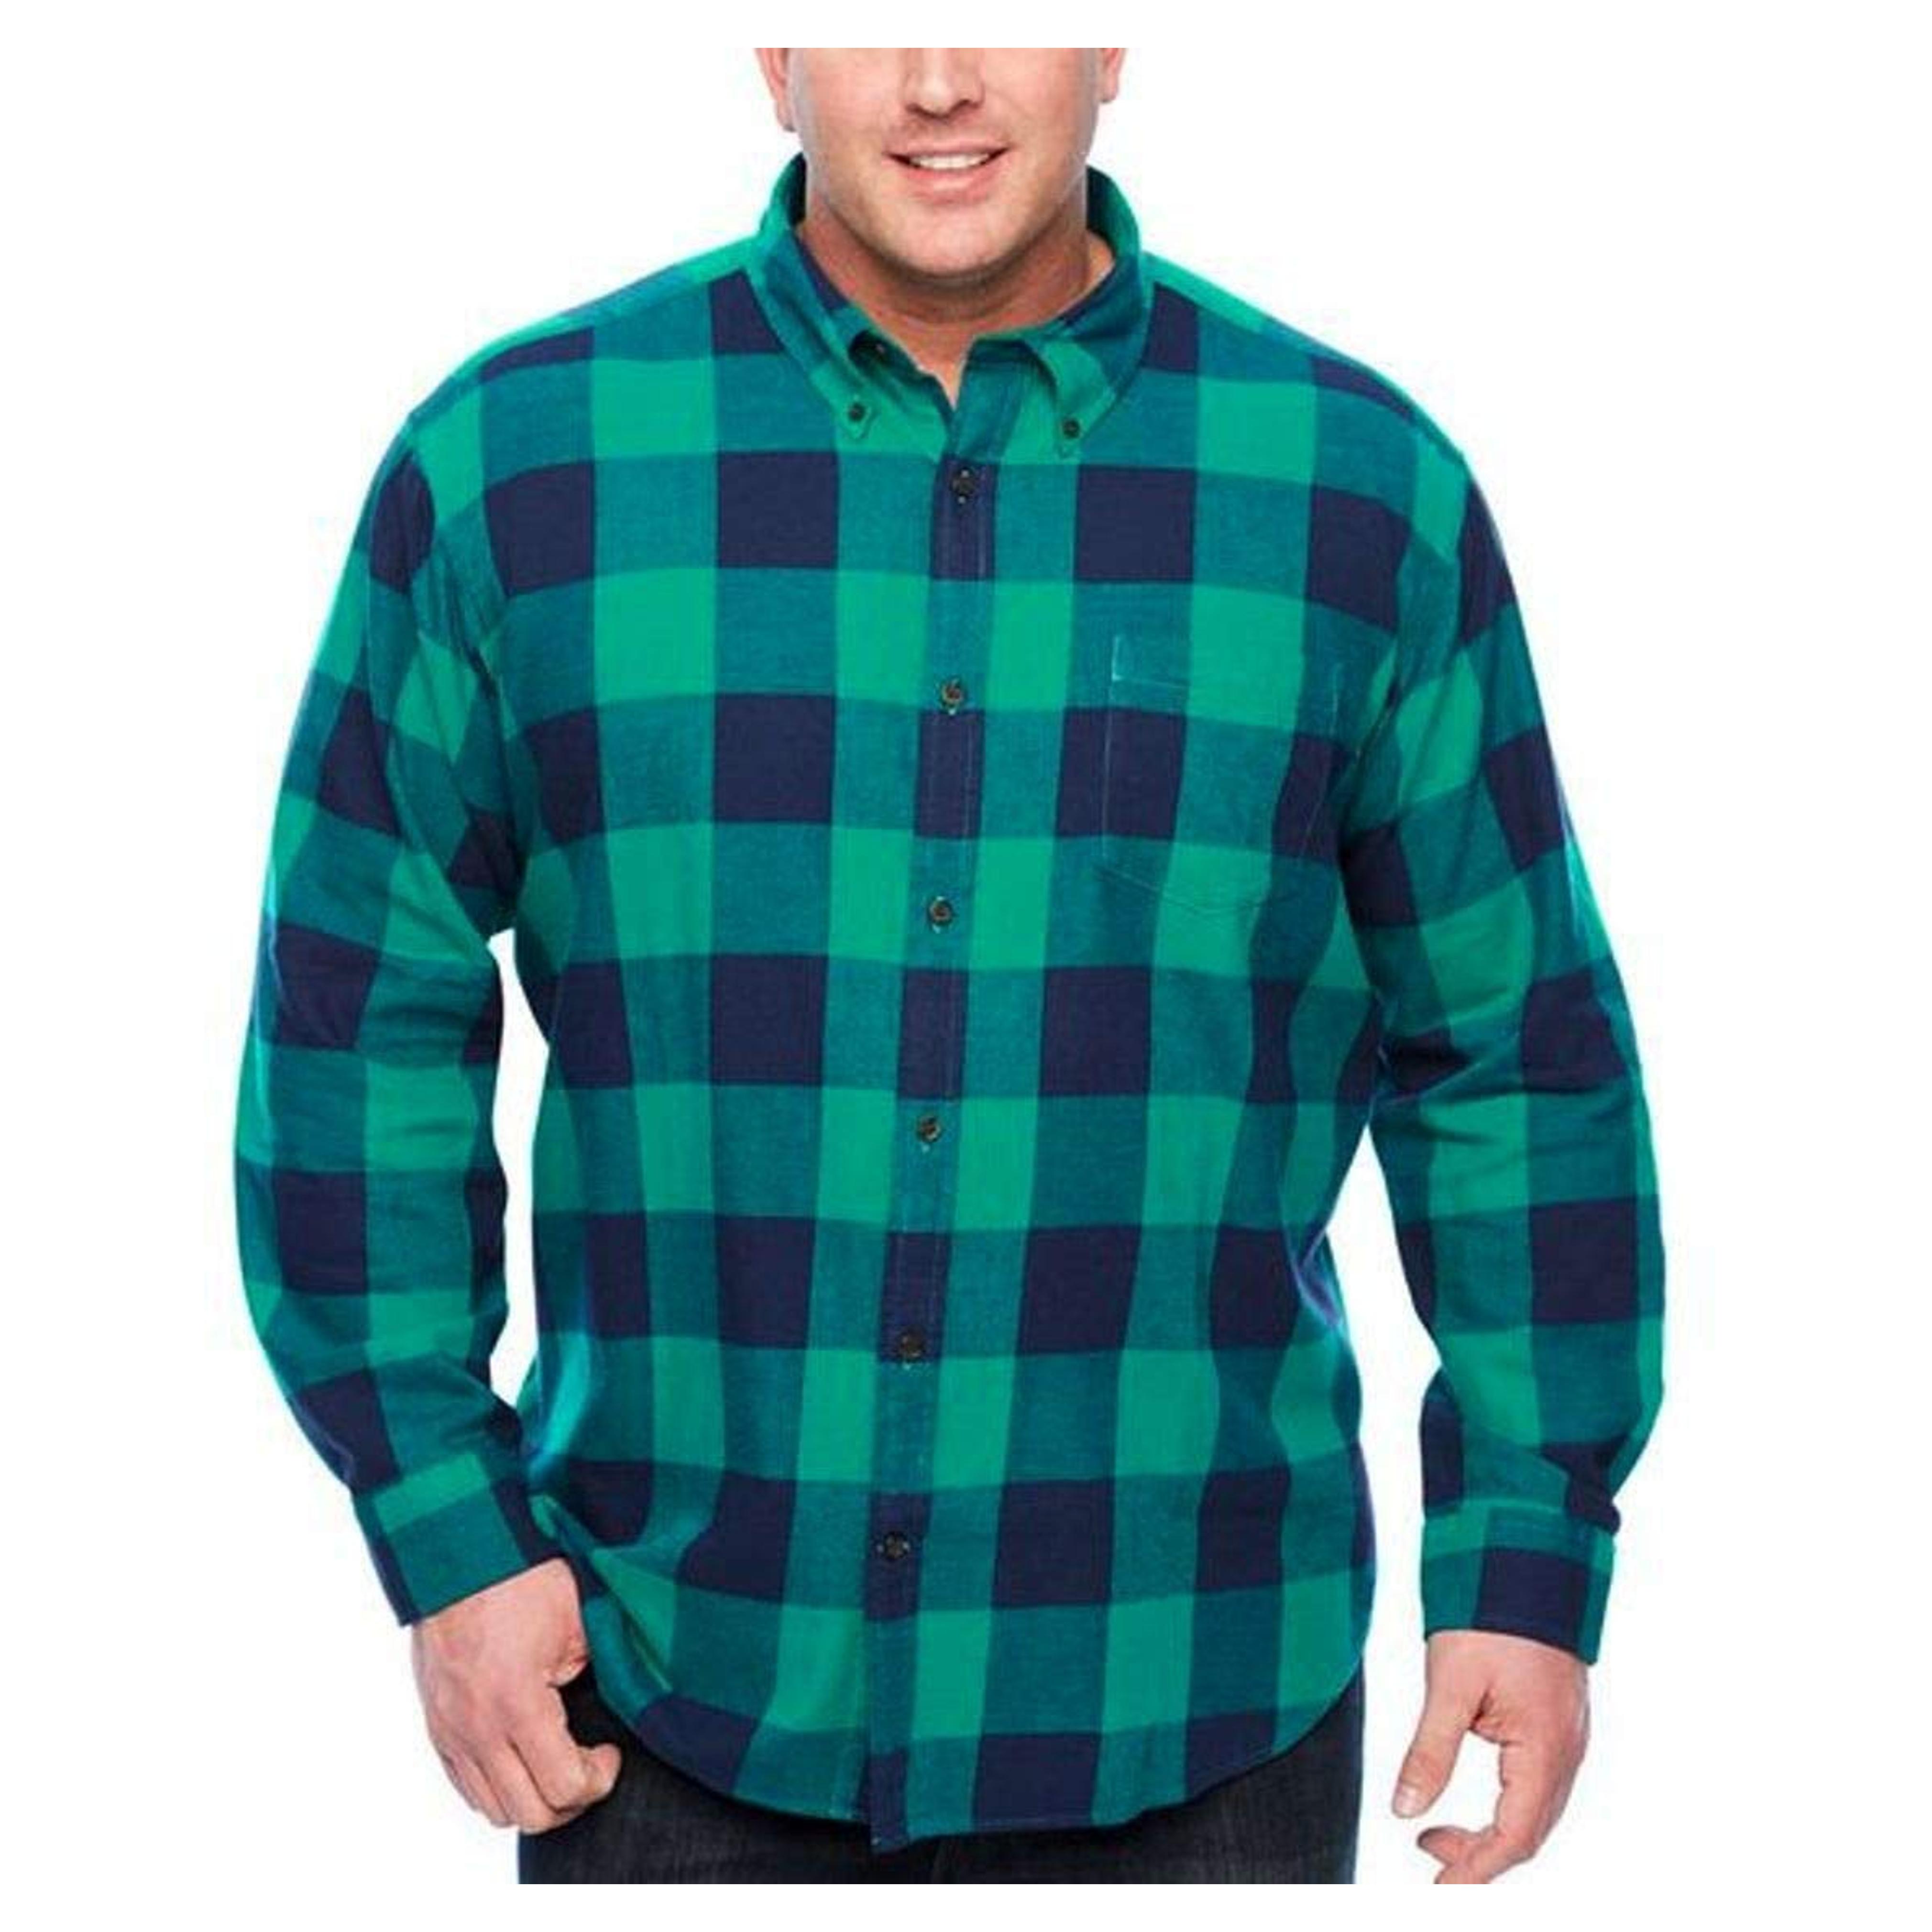 The Foundry Supply Men’s Classic Fit Long Sleeve Flannel Shirt Green Blue Buffalo Plaid